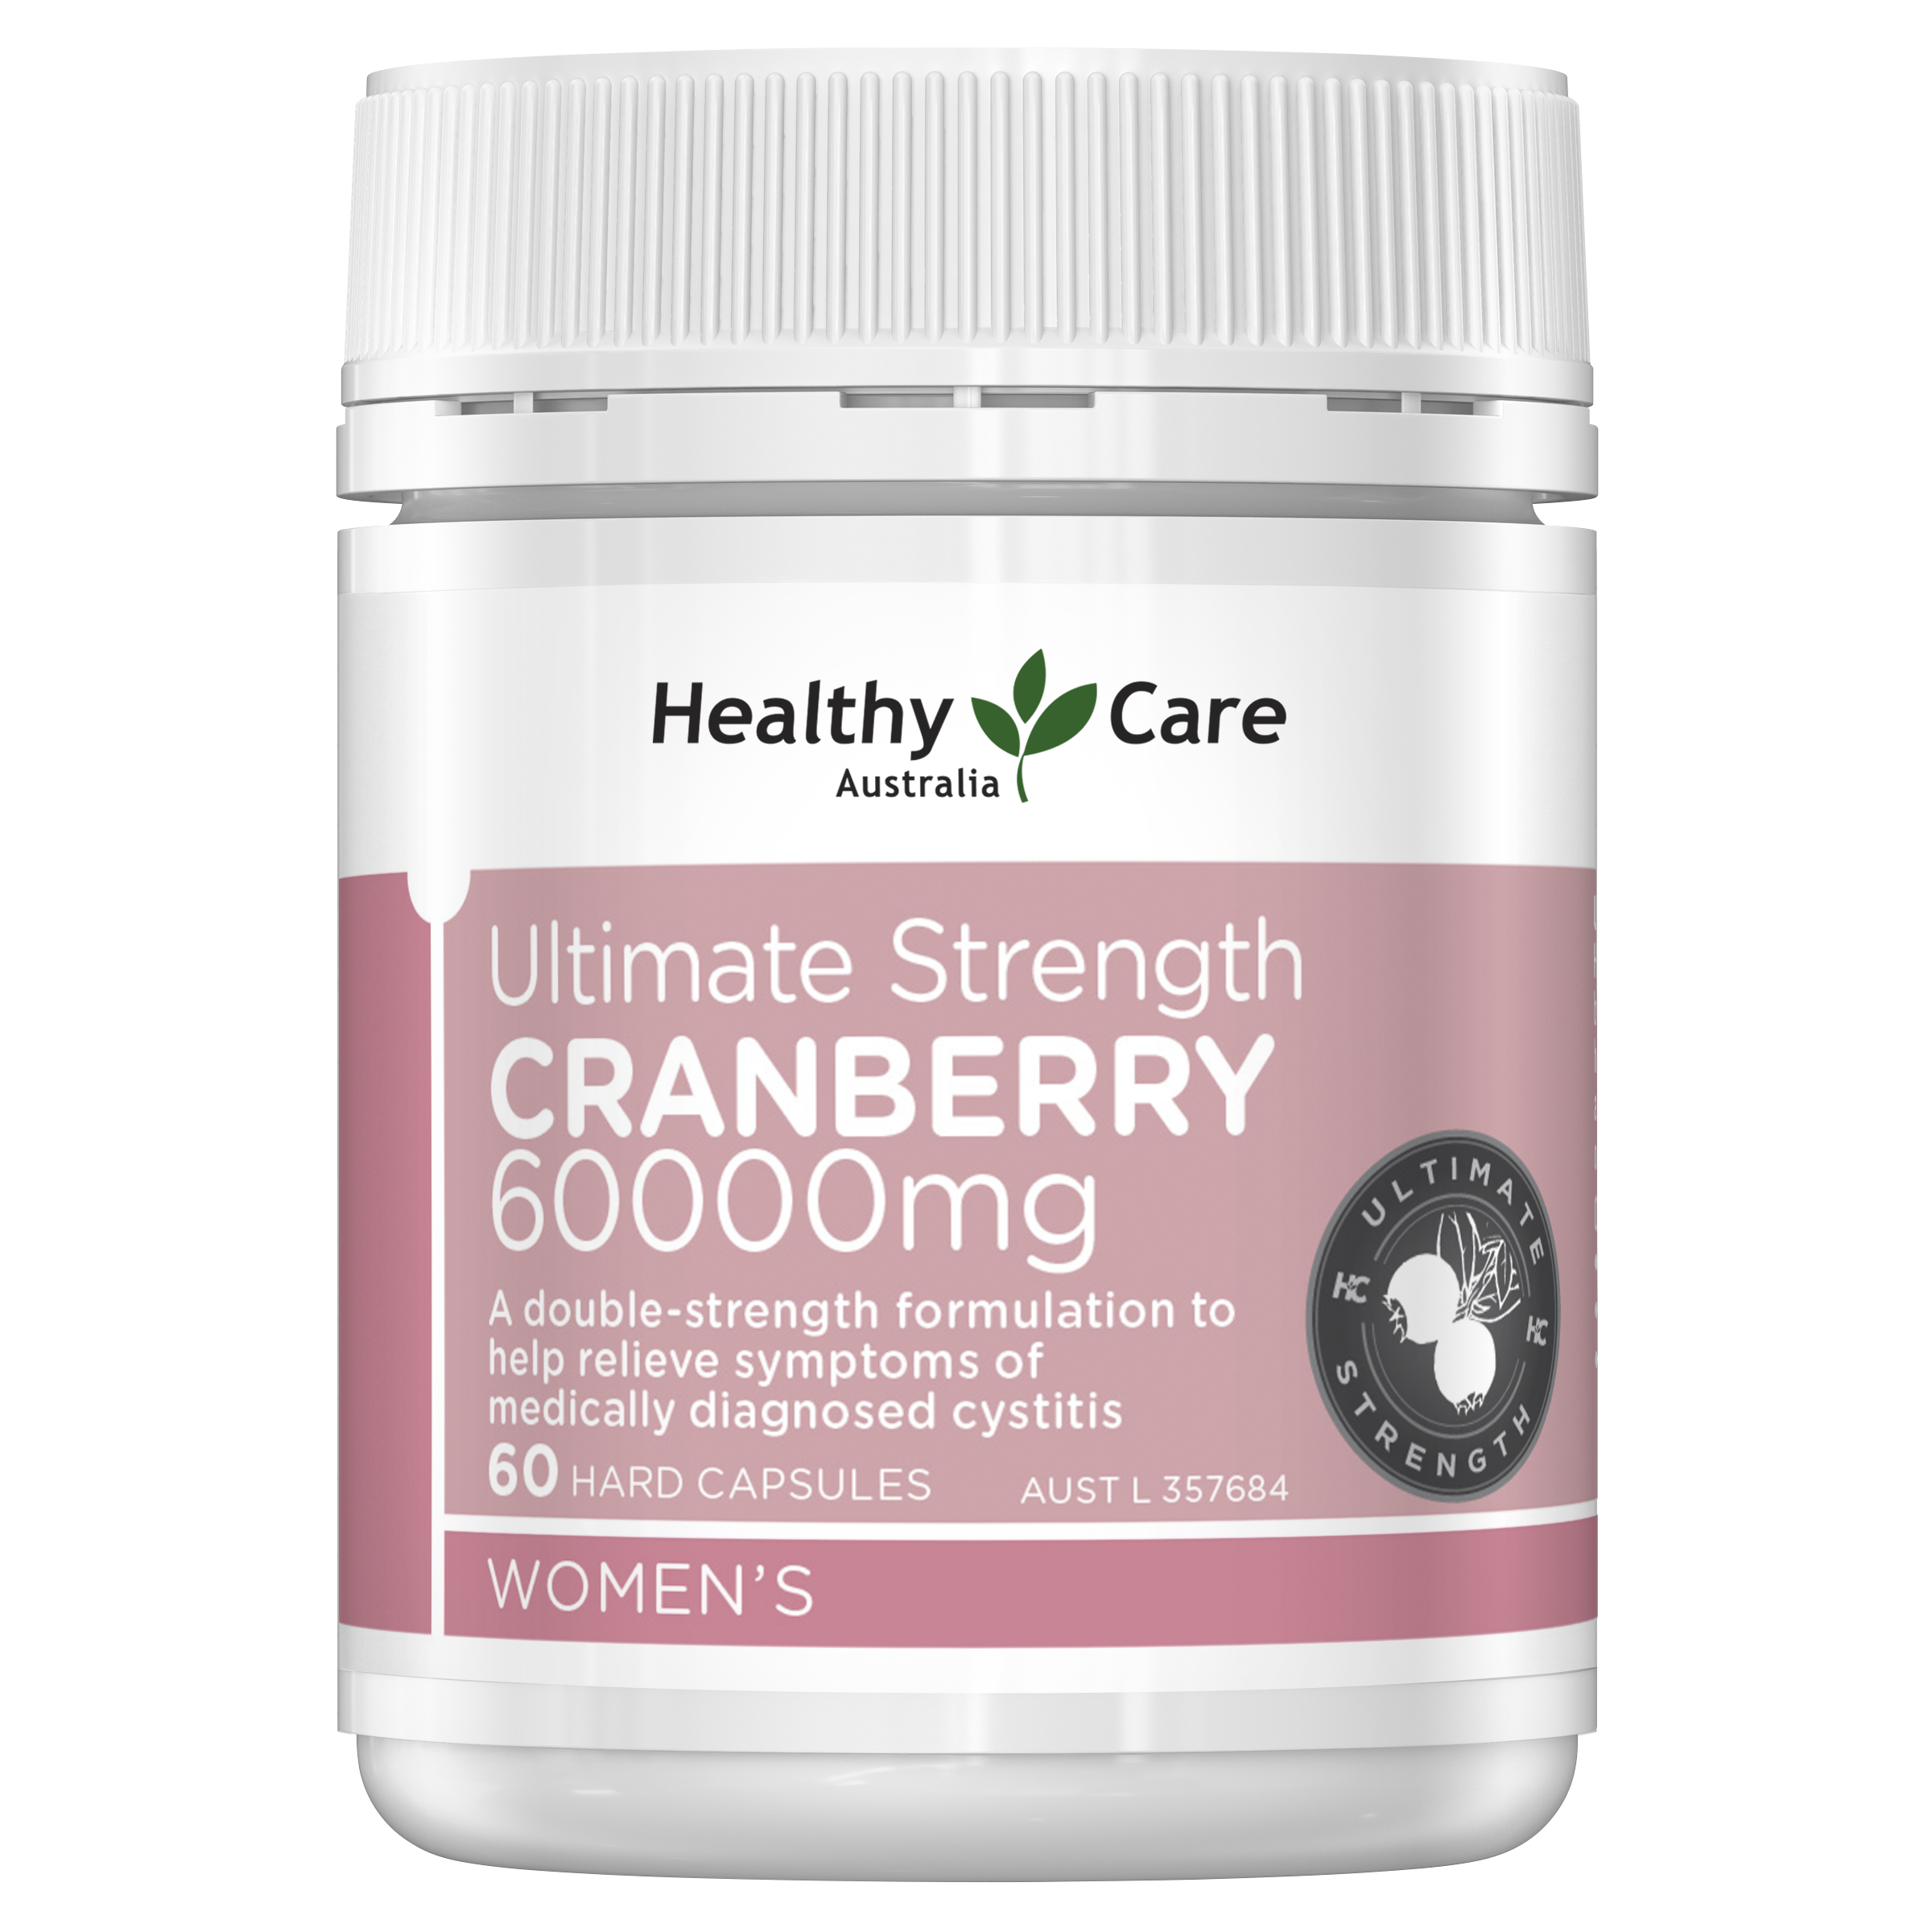 Healthy Care Ultimate Strength Cranberry 60000mg - 60 capsules